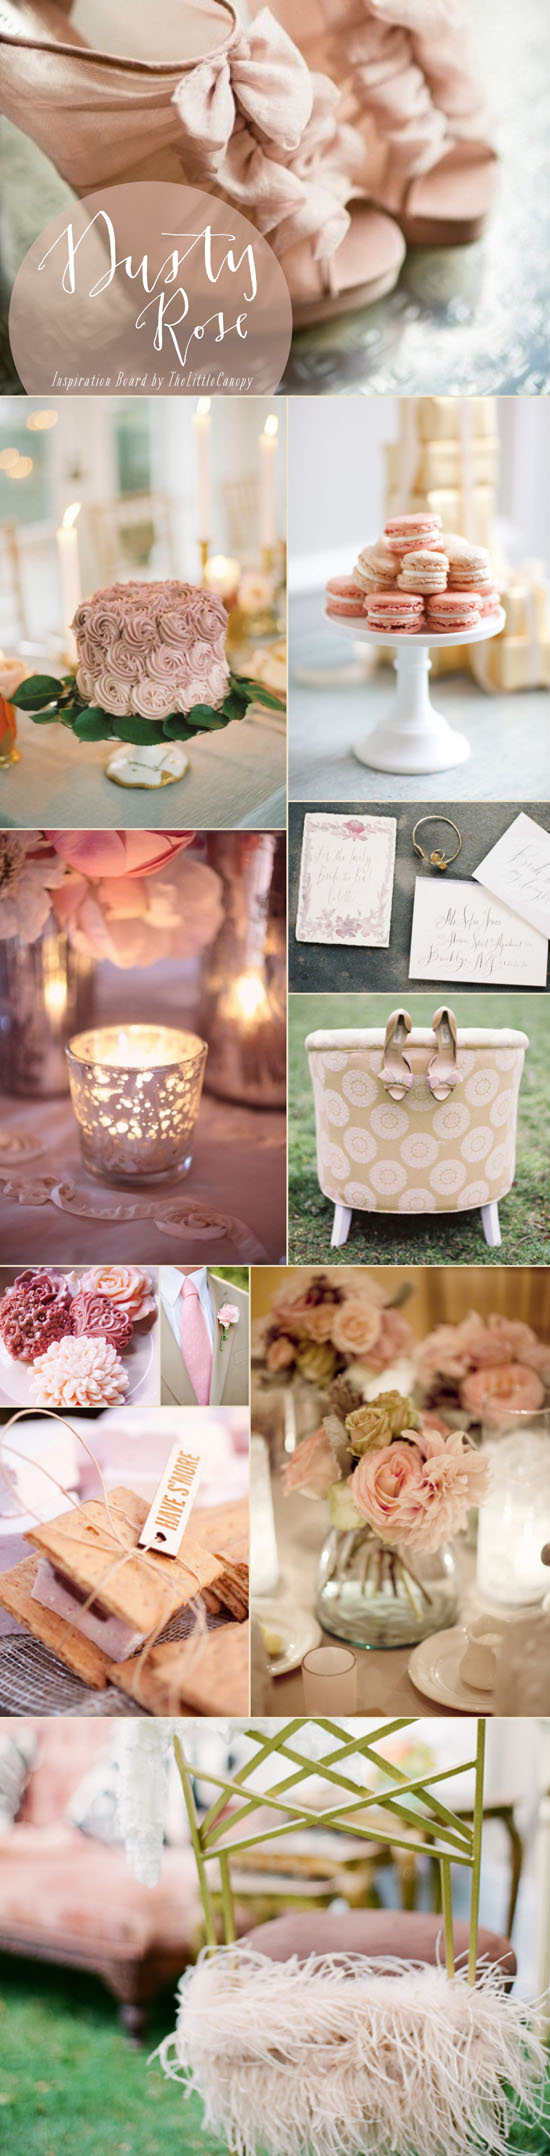 This week's inspiration board is a soothing and romantic dusty rose color theme! Such a beautiful color that can be used in so many ways to create a relaxed and sweet atmosphere. Enjoy!